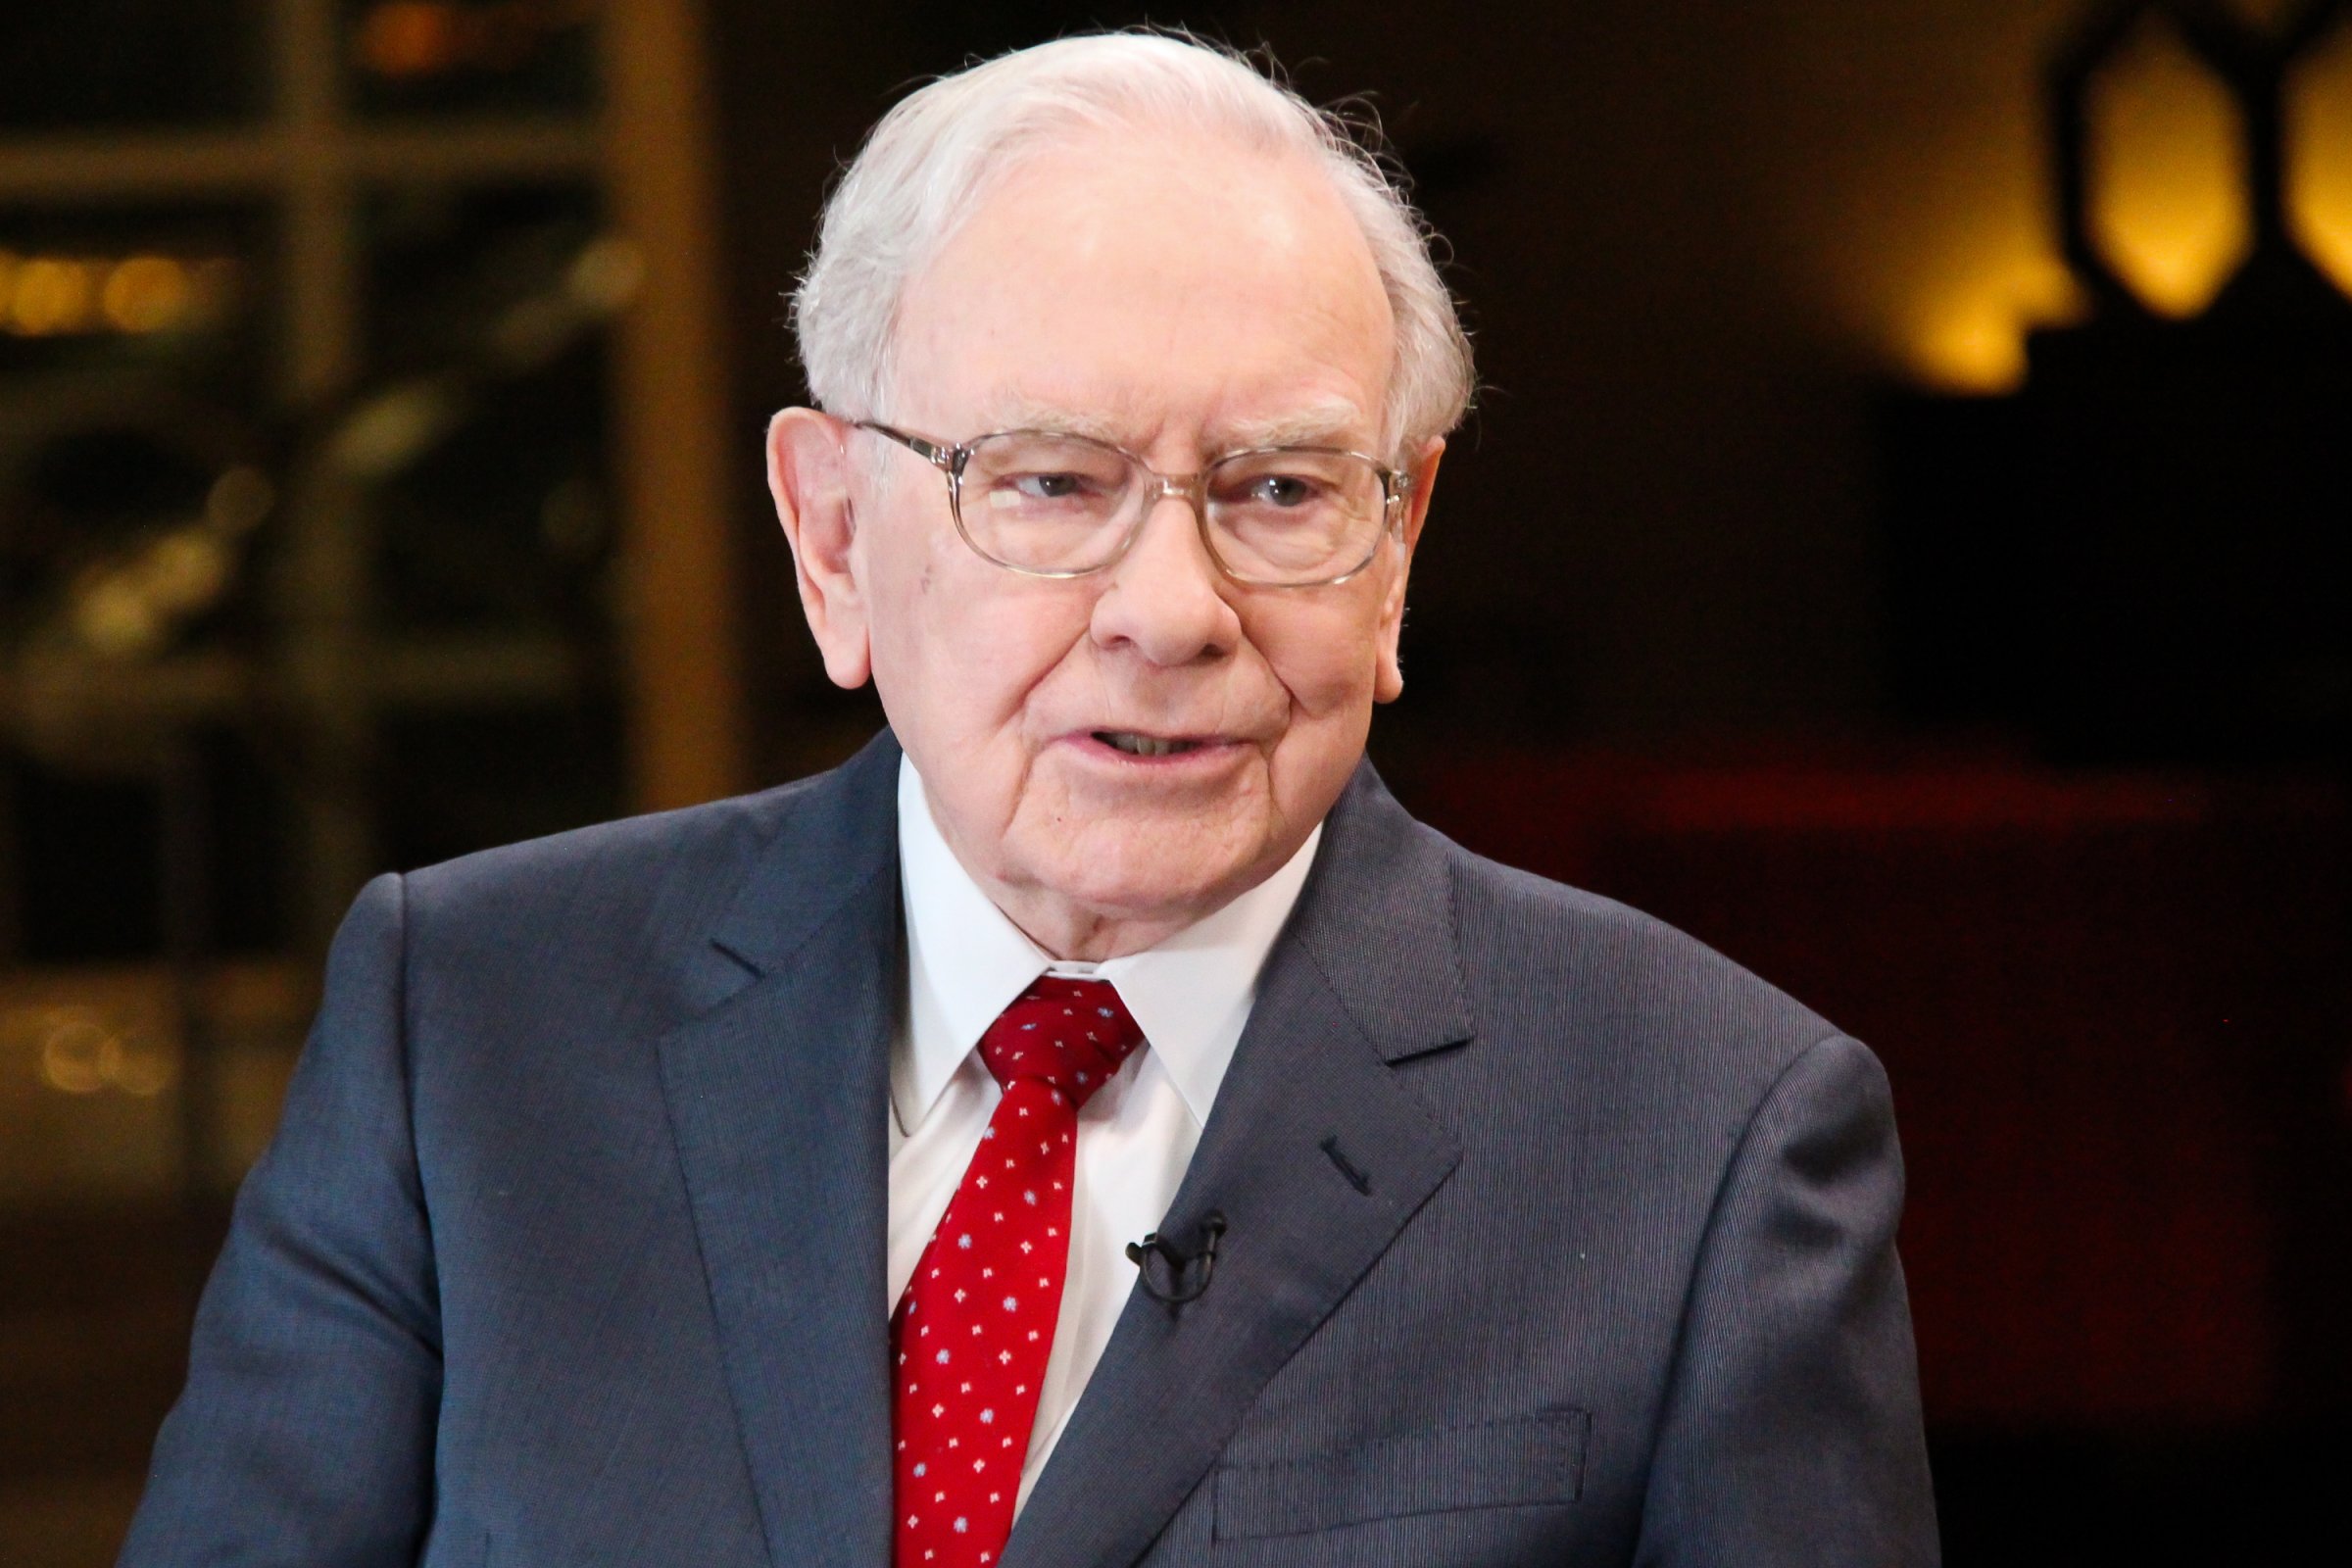 Warren Buffett, chairman and CEO of Berkshire Hathaway, and consistently ranked among the world's wealthiest people, in an interview with Squawk Box on Feb. 29, 2016.